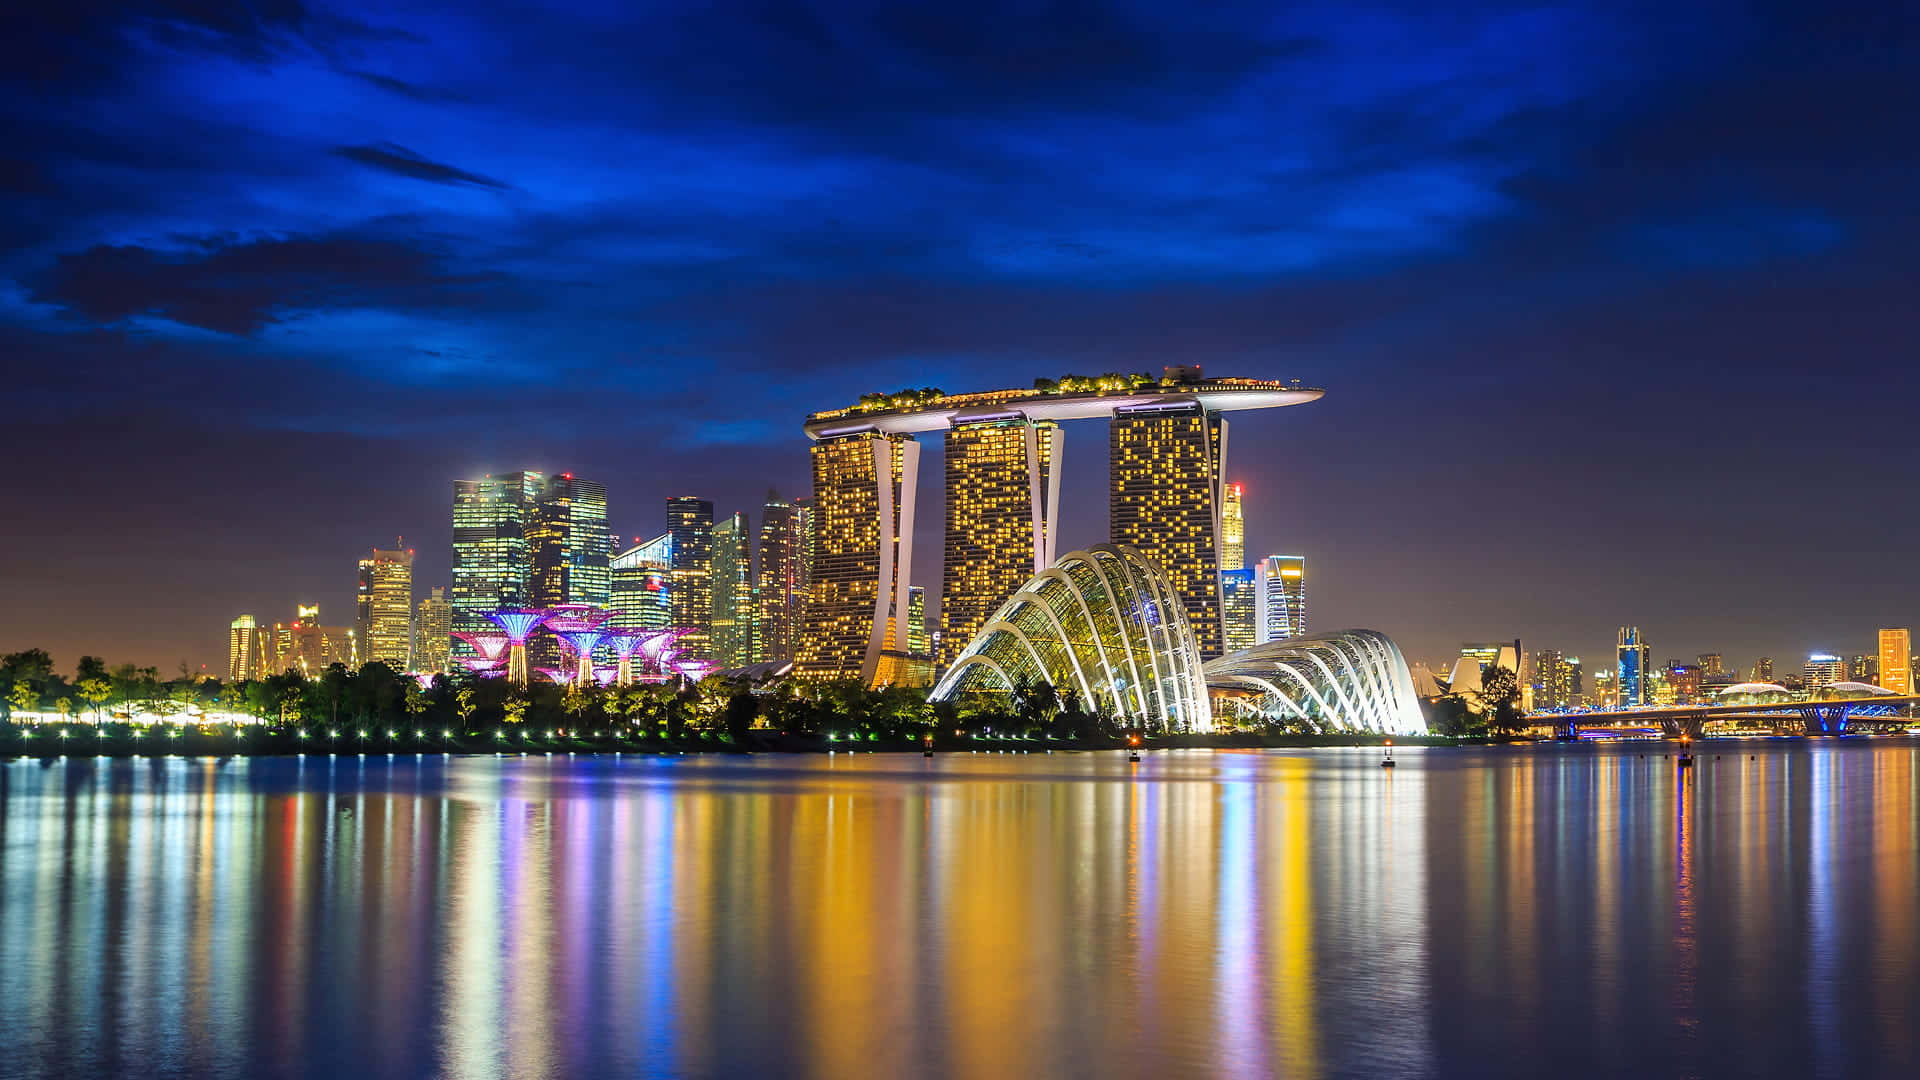 Soak in the Magnificence of Singapore